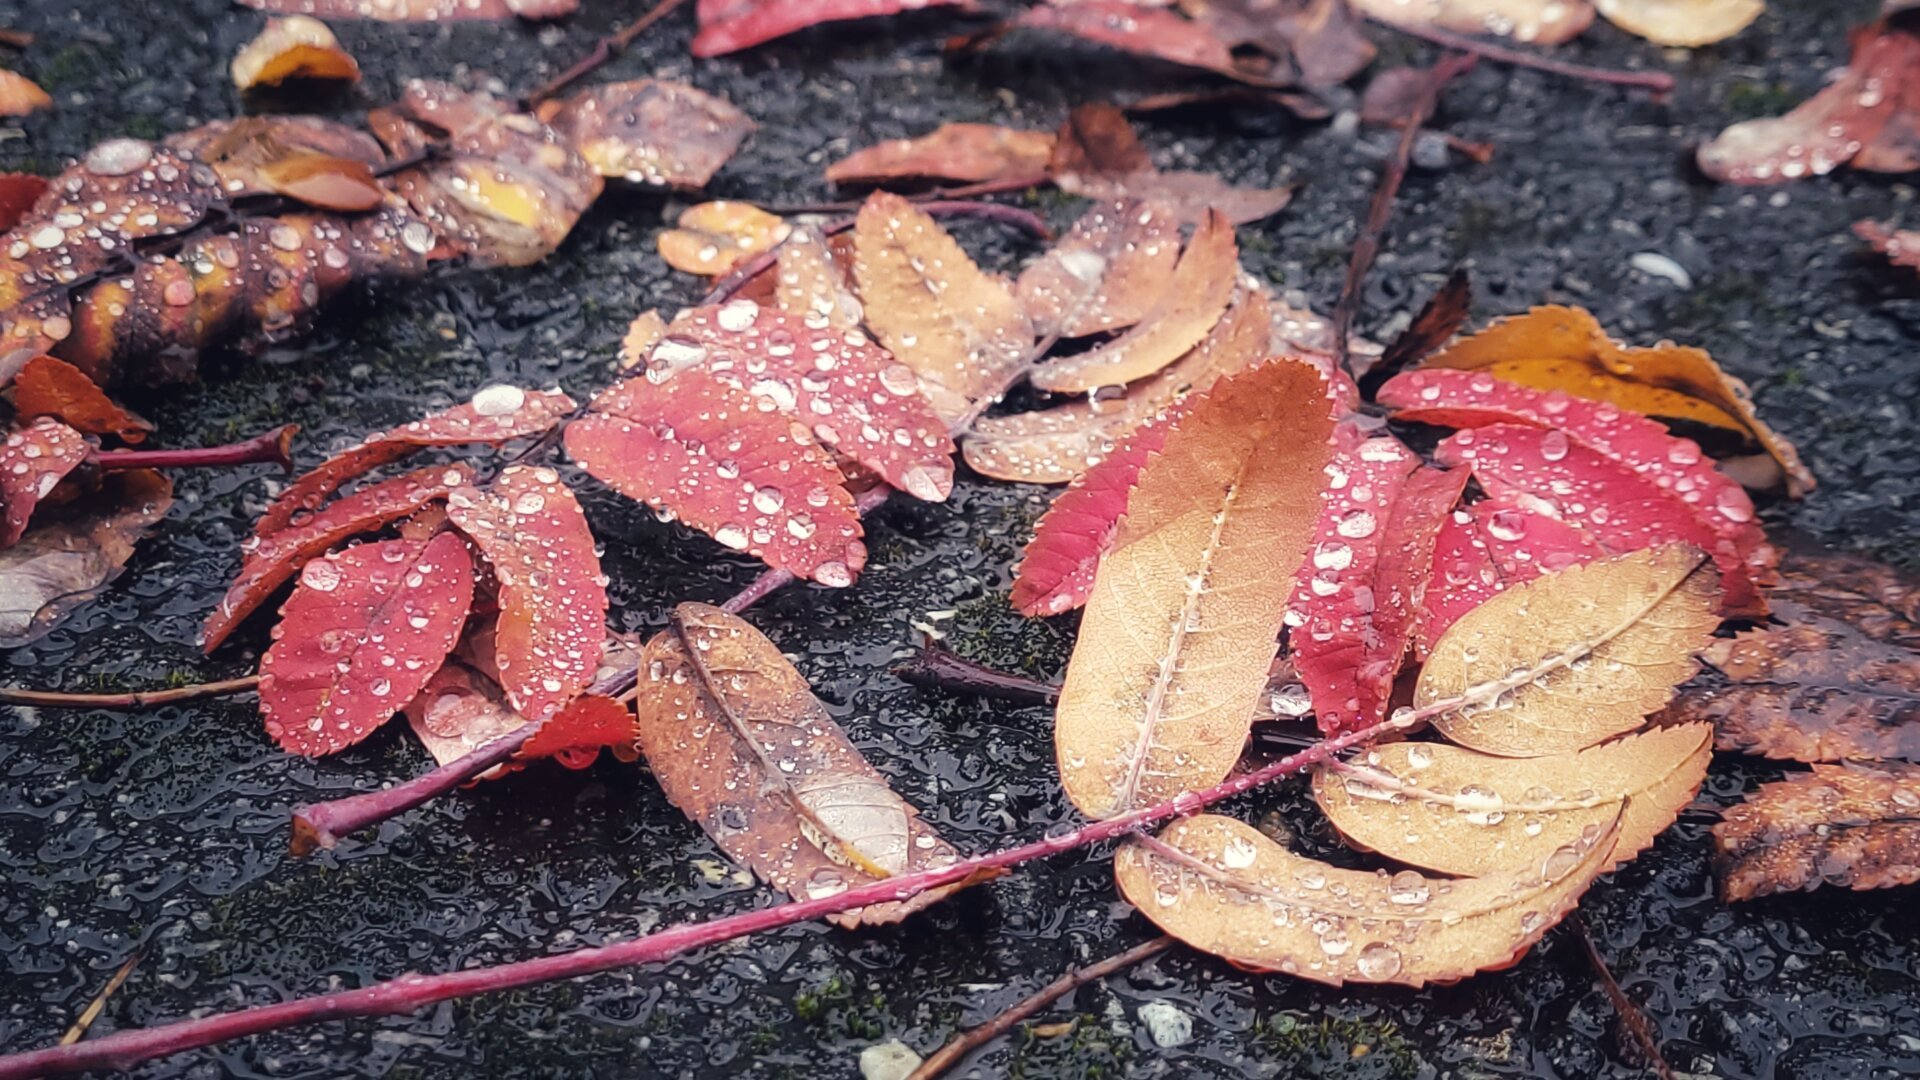 Different kinds of leaves in different kind of decaying states and colour are lying on grey asfalt and black mud. Everything is coated with waterdrops.